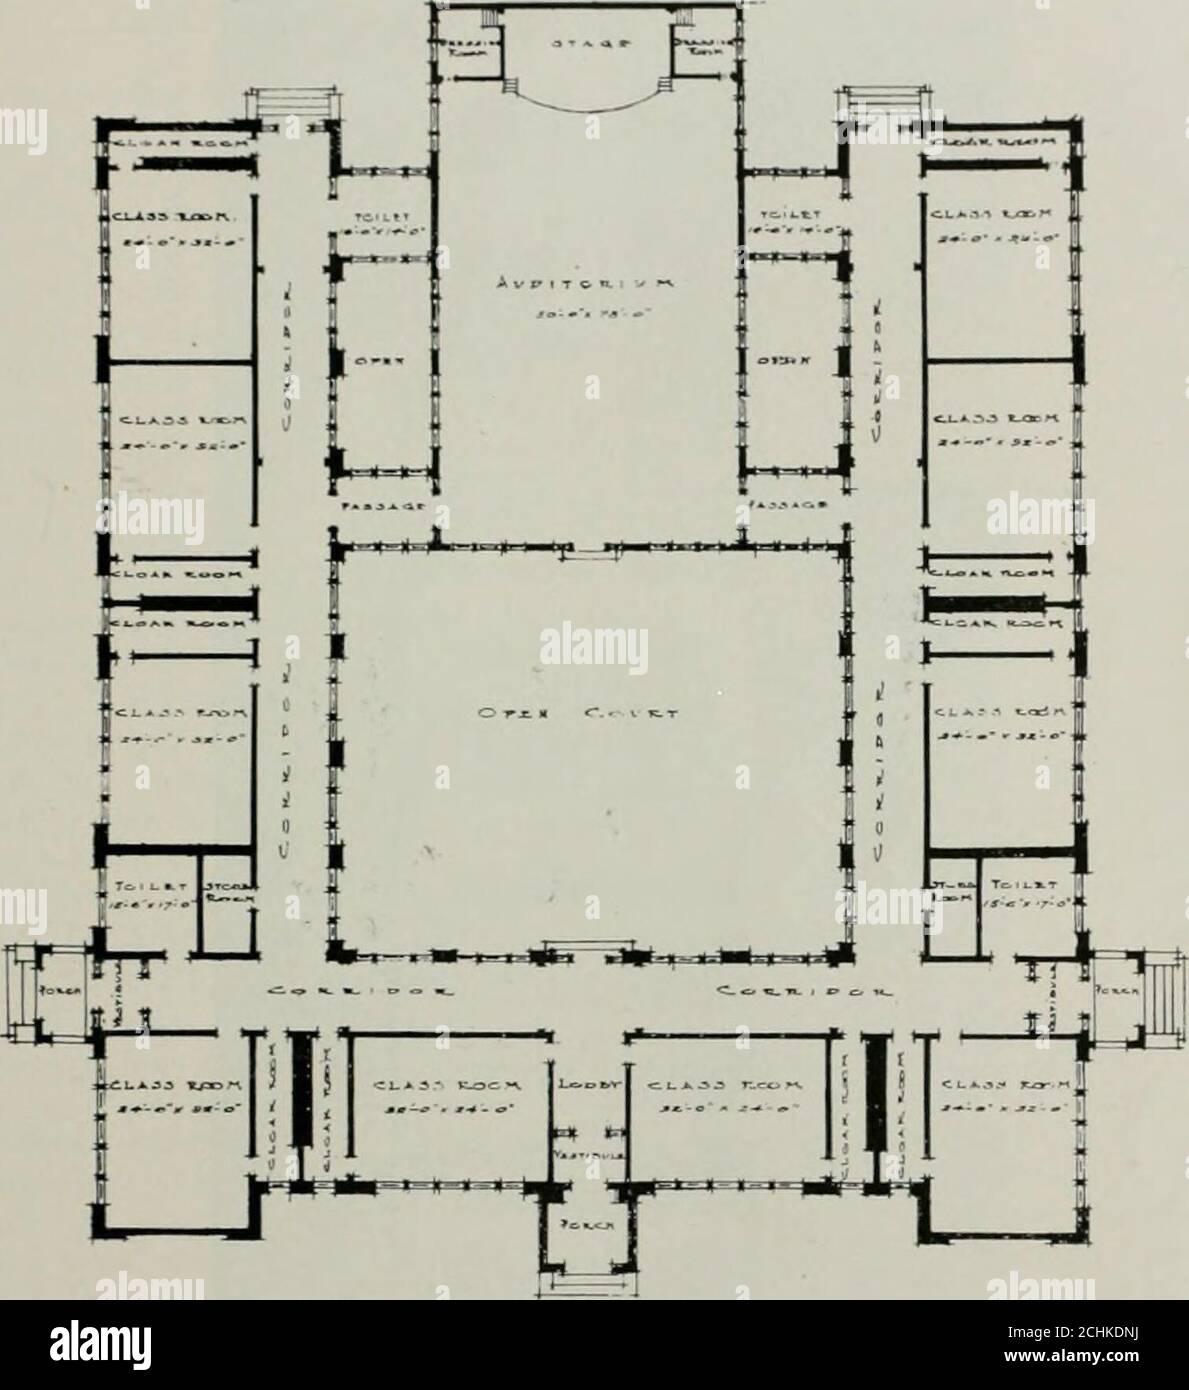 . The Architect & engineer of California and the Pacific Coast . FIRST FLOOR PLAN. PRESENT BUILDING. ROSEMONT SCHOOL Tlu- Archilccl and Iin:^nccr S9. Okitcx ru« or ACon7LiTt CnOTciT Jvamci SCHEME FOR COMPLETE nElELOIMEST OF KOSEMOXT SCHOOL Fussiness in Architecture A great vice that is creeping intu American arcliitcctnre nf interiorstoday is an exaggeration of tiny details. Moldings are nuiltiplied until the}become liney and disturbing. Every little plain surface is paneled in mosttiresome fashion. It is as if draftsmen had come to hate a white spot on apiece of paper or a blank space on a w Stock Photo